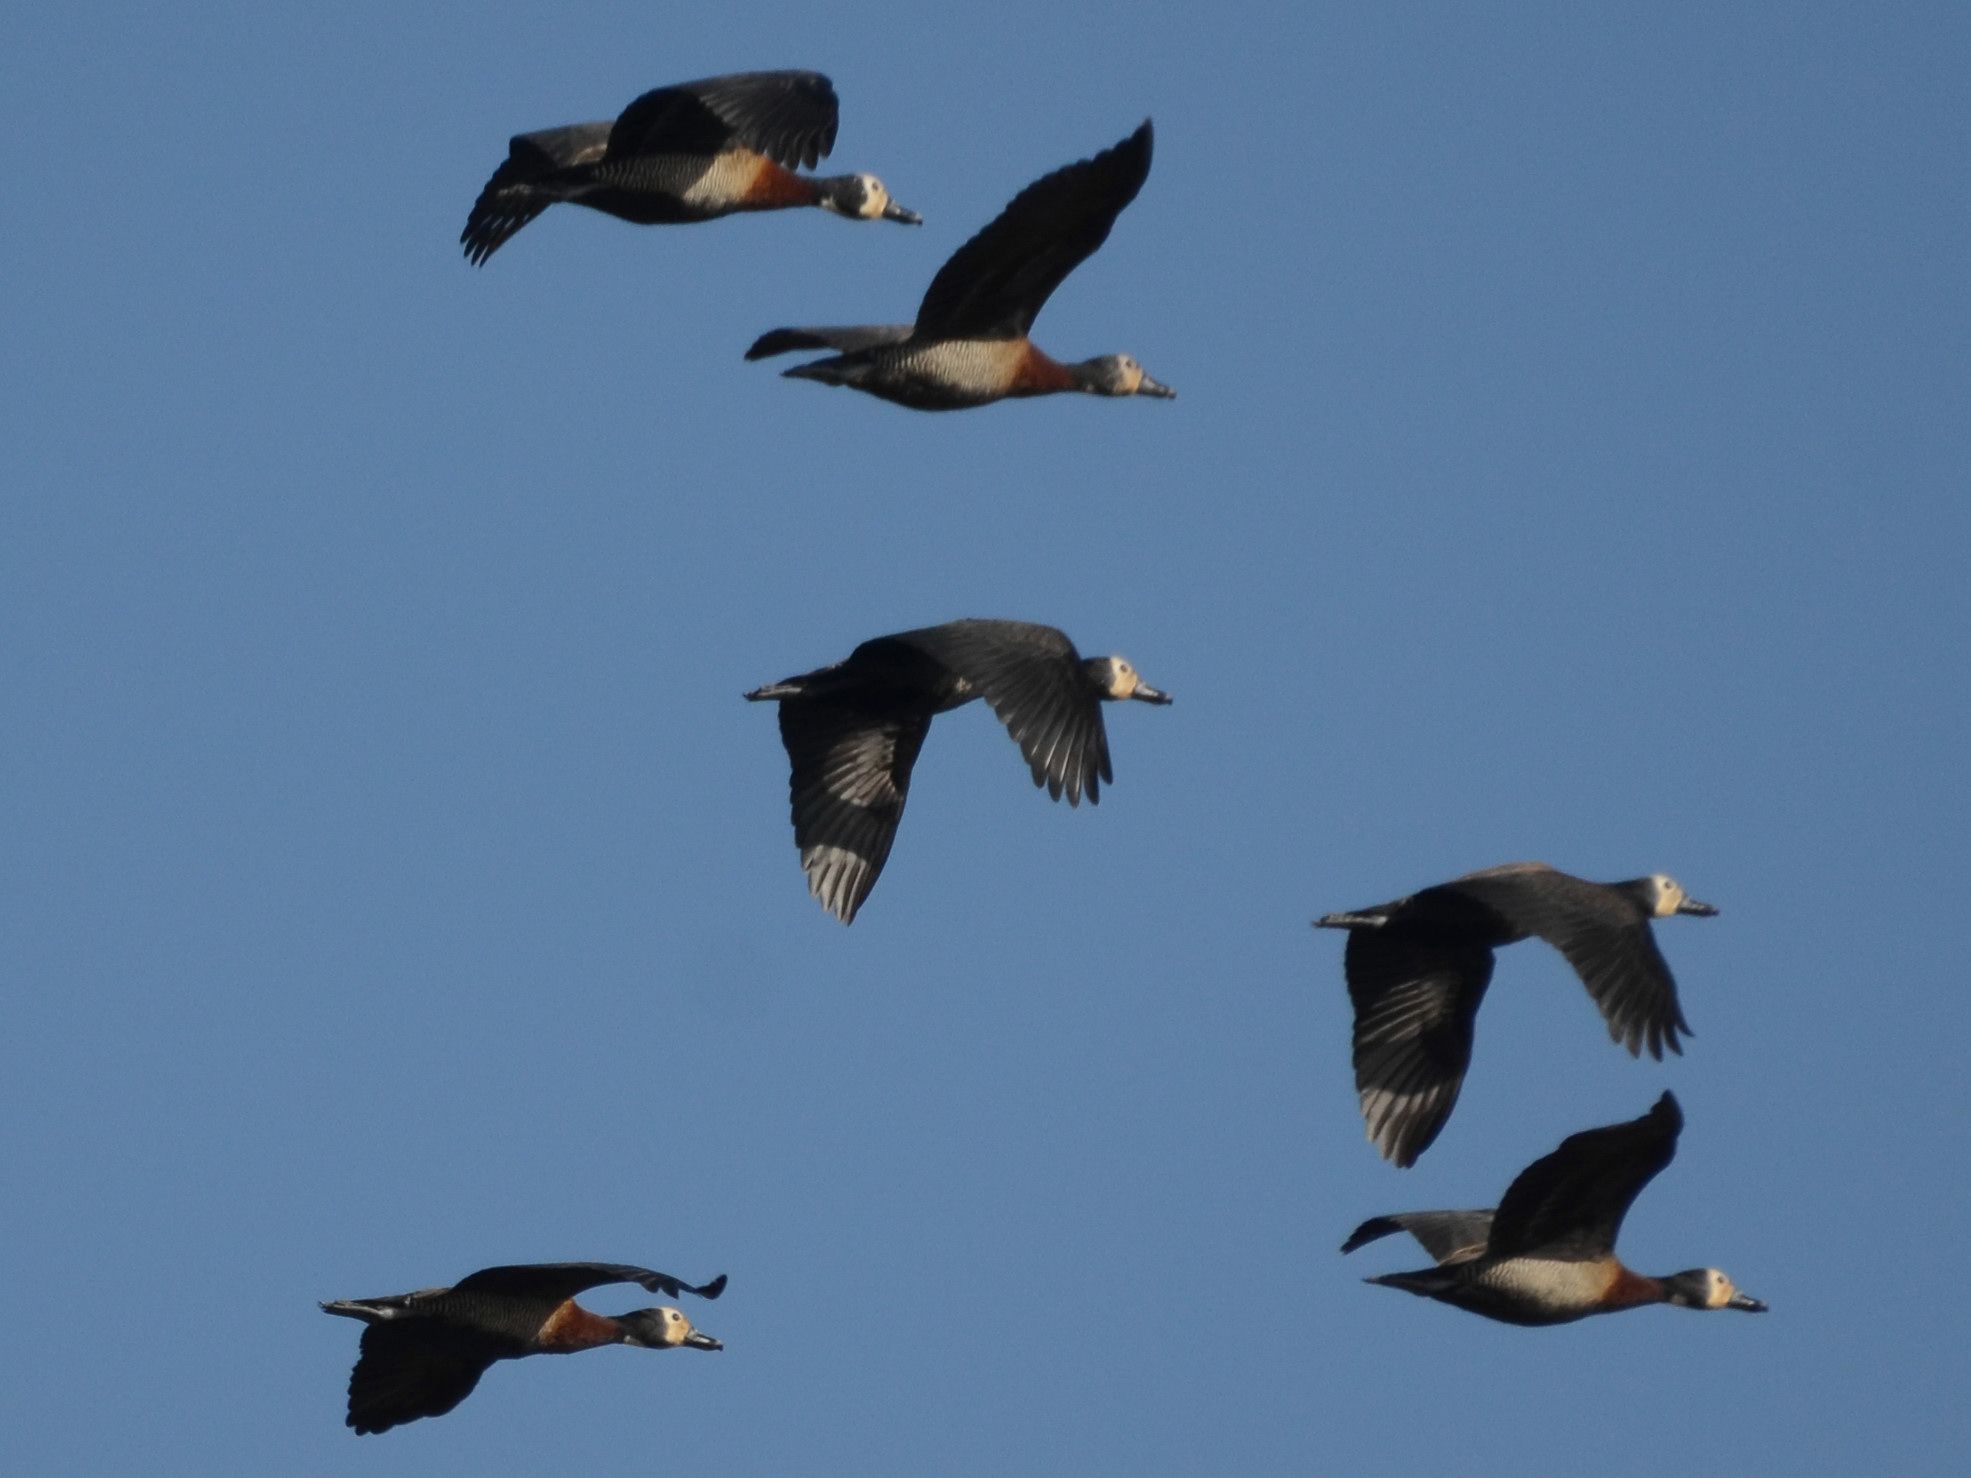 Click picture to see more White-faced Whistling-Ducks.